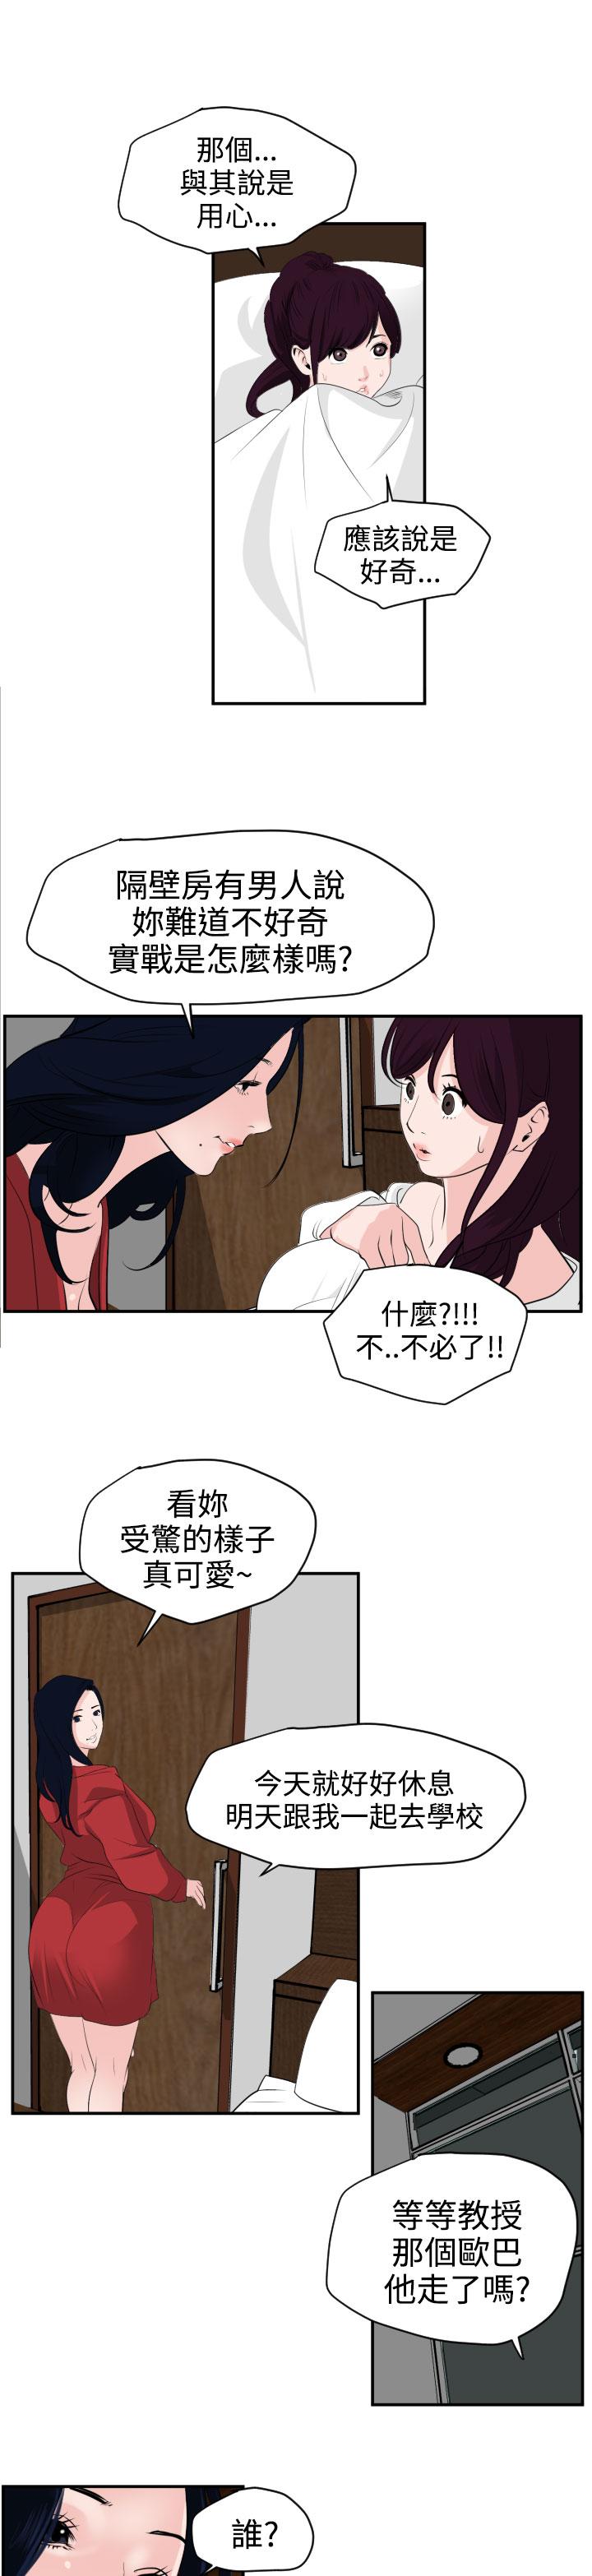 Desire King (慾求王) Ch.1-16 (chinese) 494